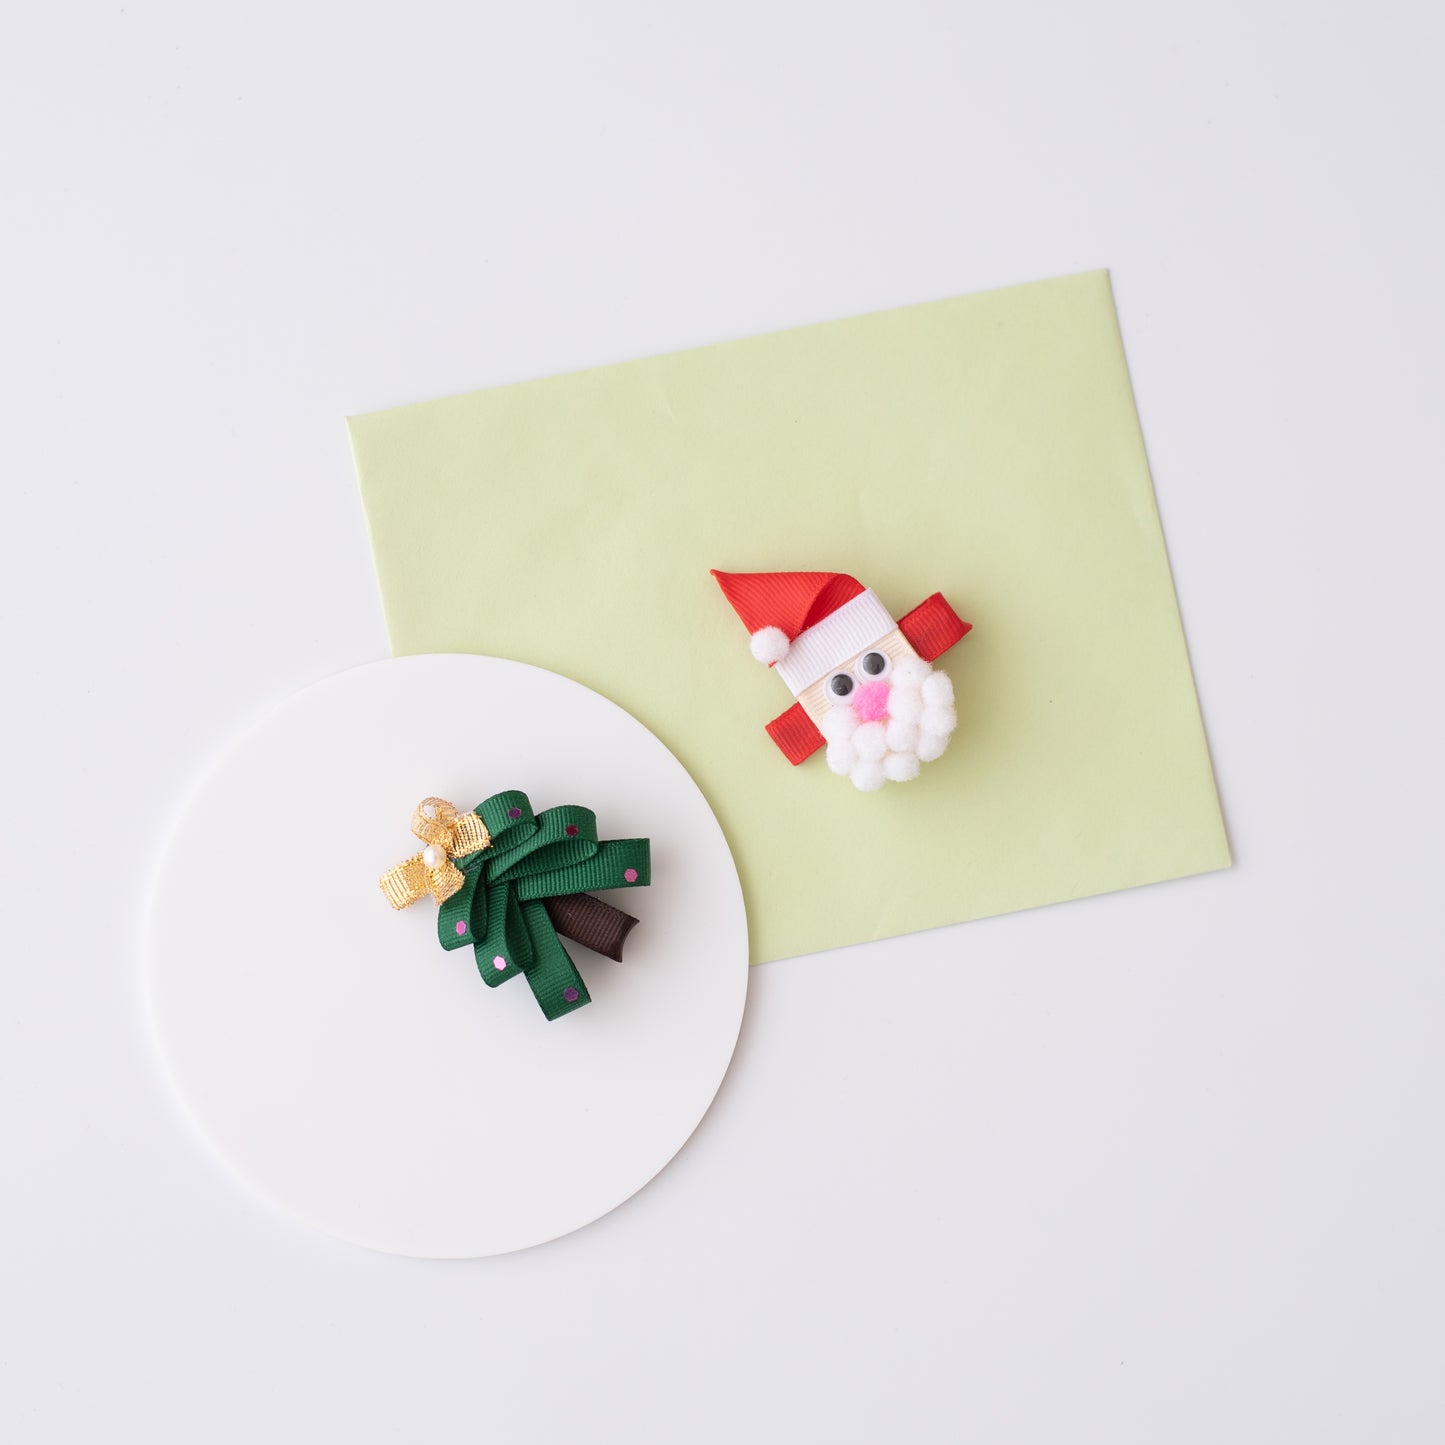 Set of 2 cute handmade alligator pins - 1 christmas tree and 1 santa claus - Red, White, Green